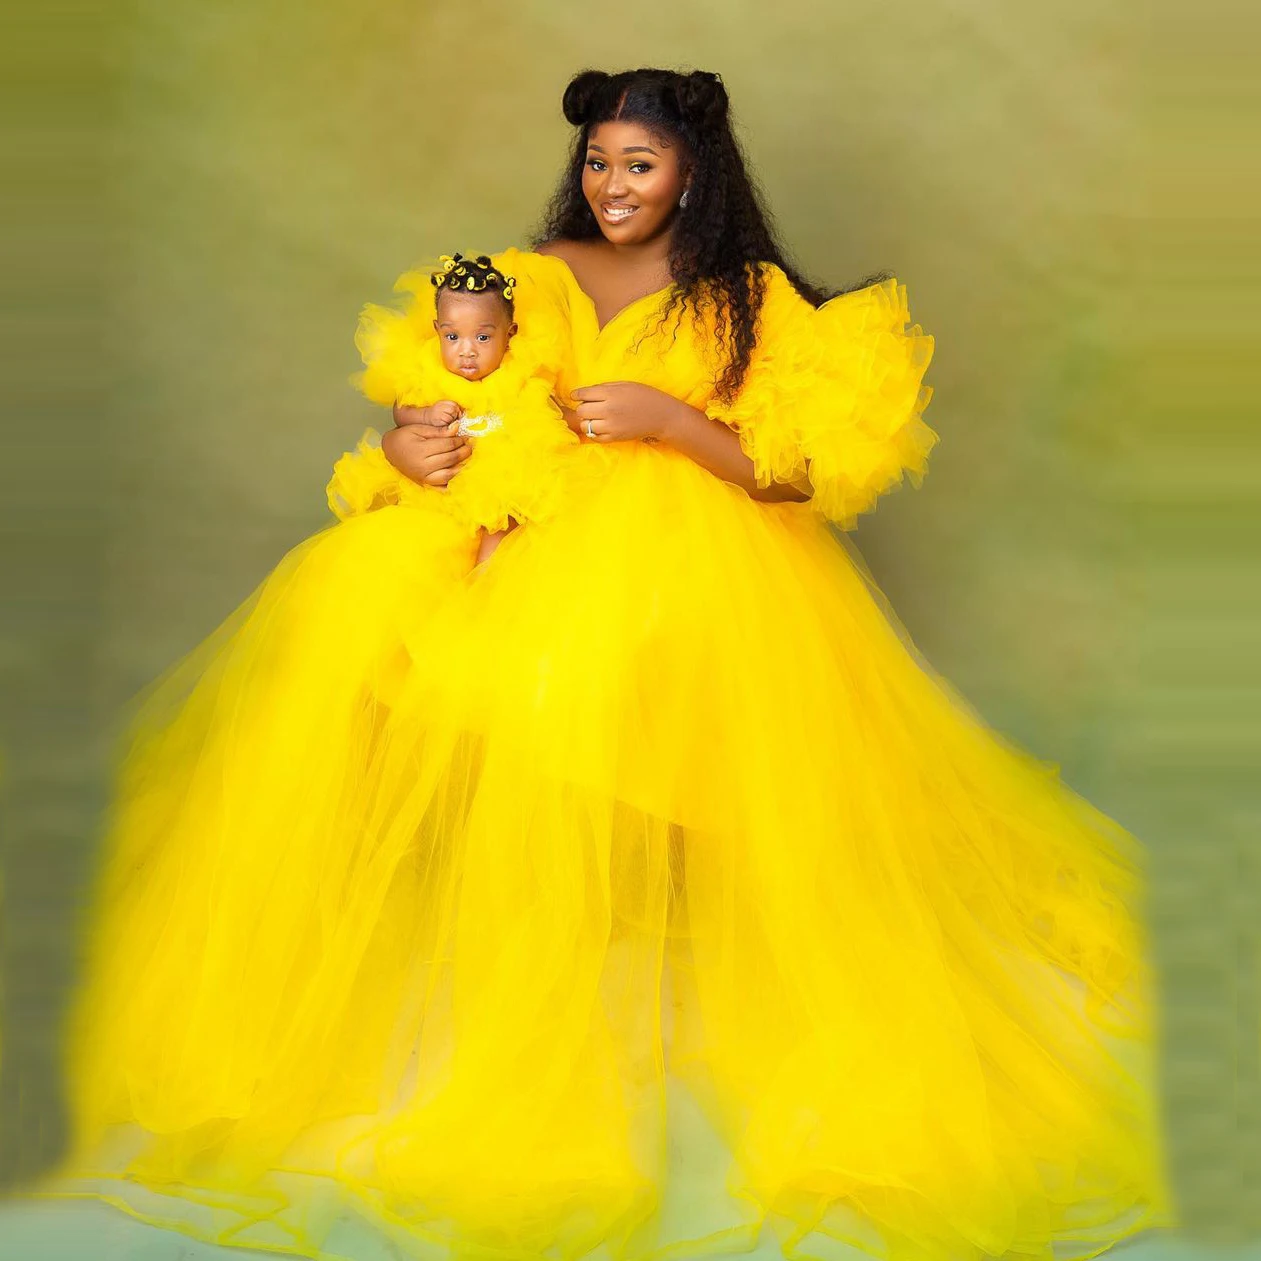 

Extra Puffy Mother And Daughter Matching Dresses V Neck Ball Gown Plus Size Mom And Me Evening Gown Family Look Photo Shoot